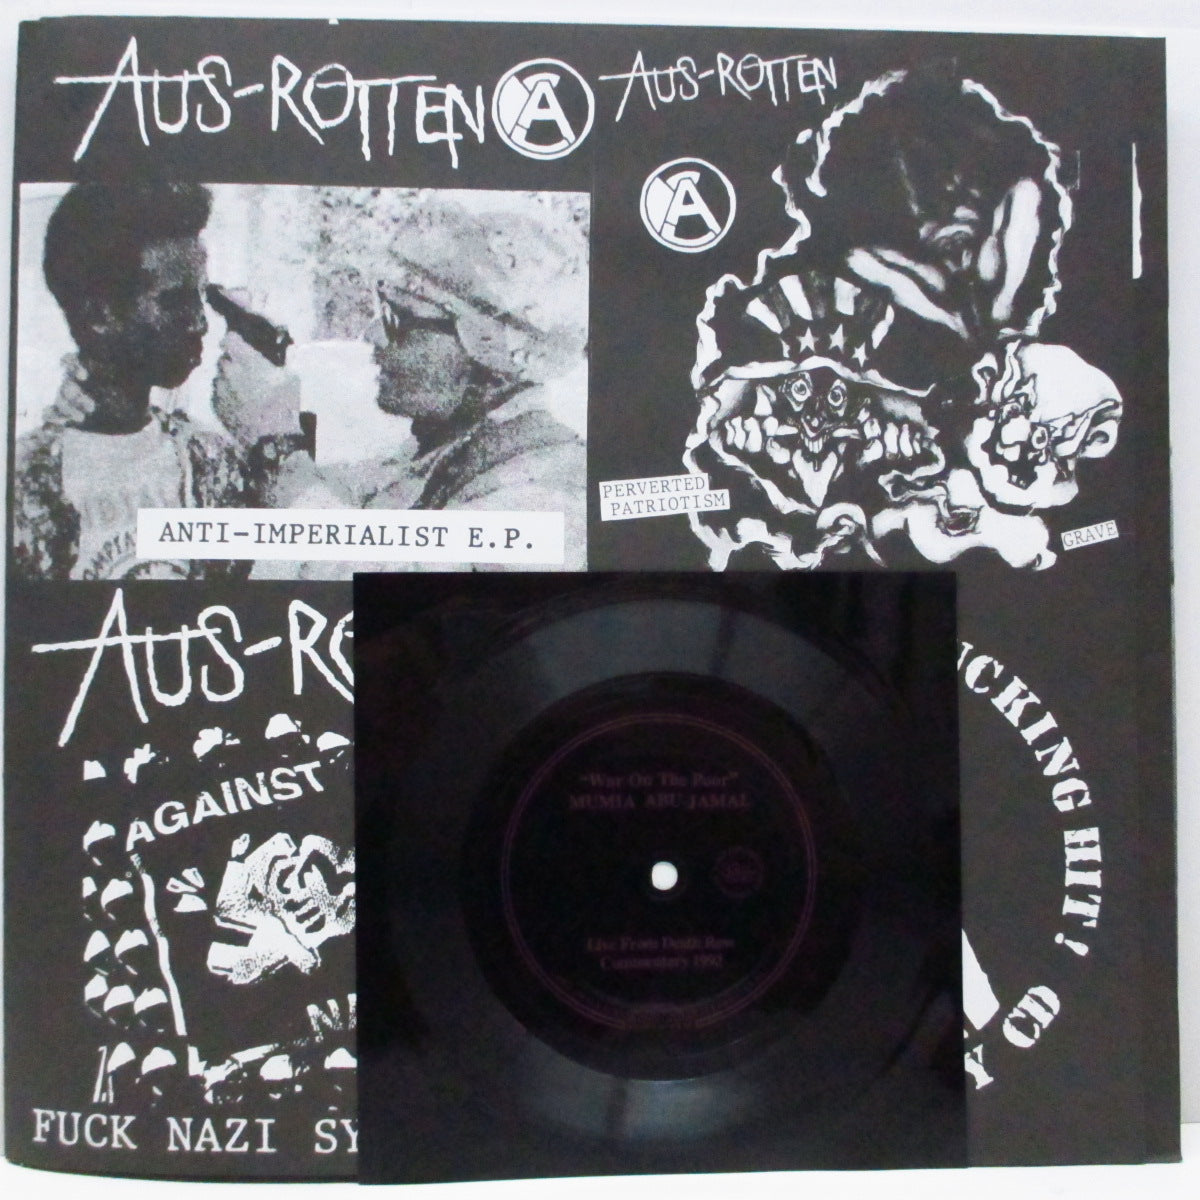 AUS-ROTTEN - Not One Single Fucking Hit Discography (US オリジナル